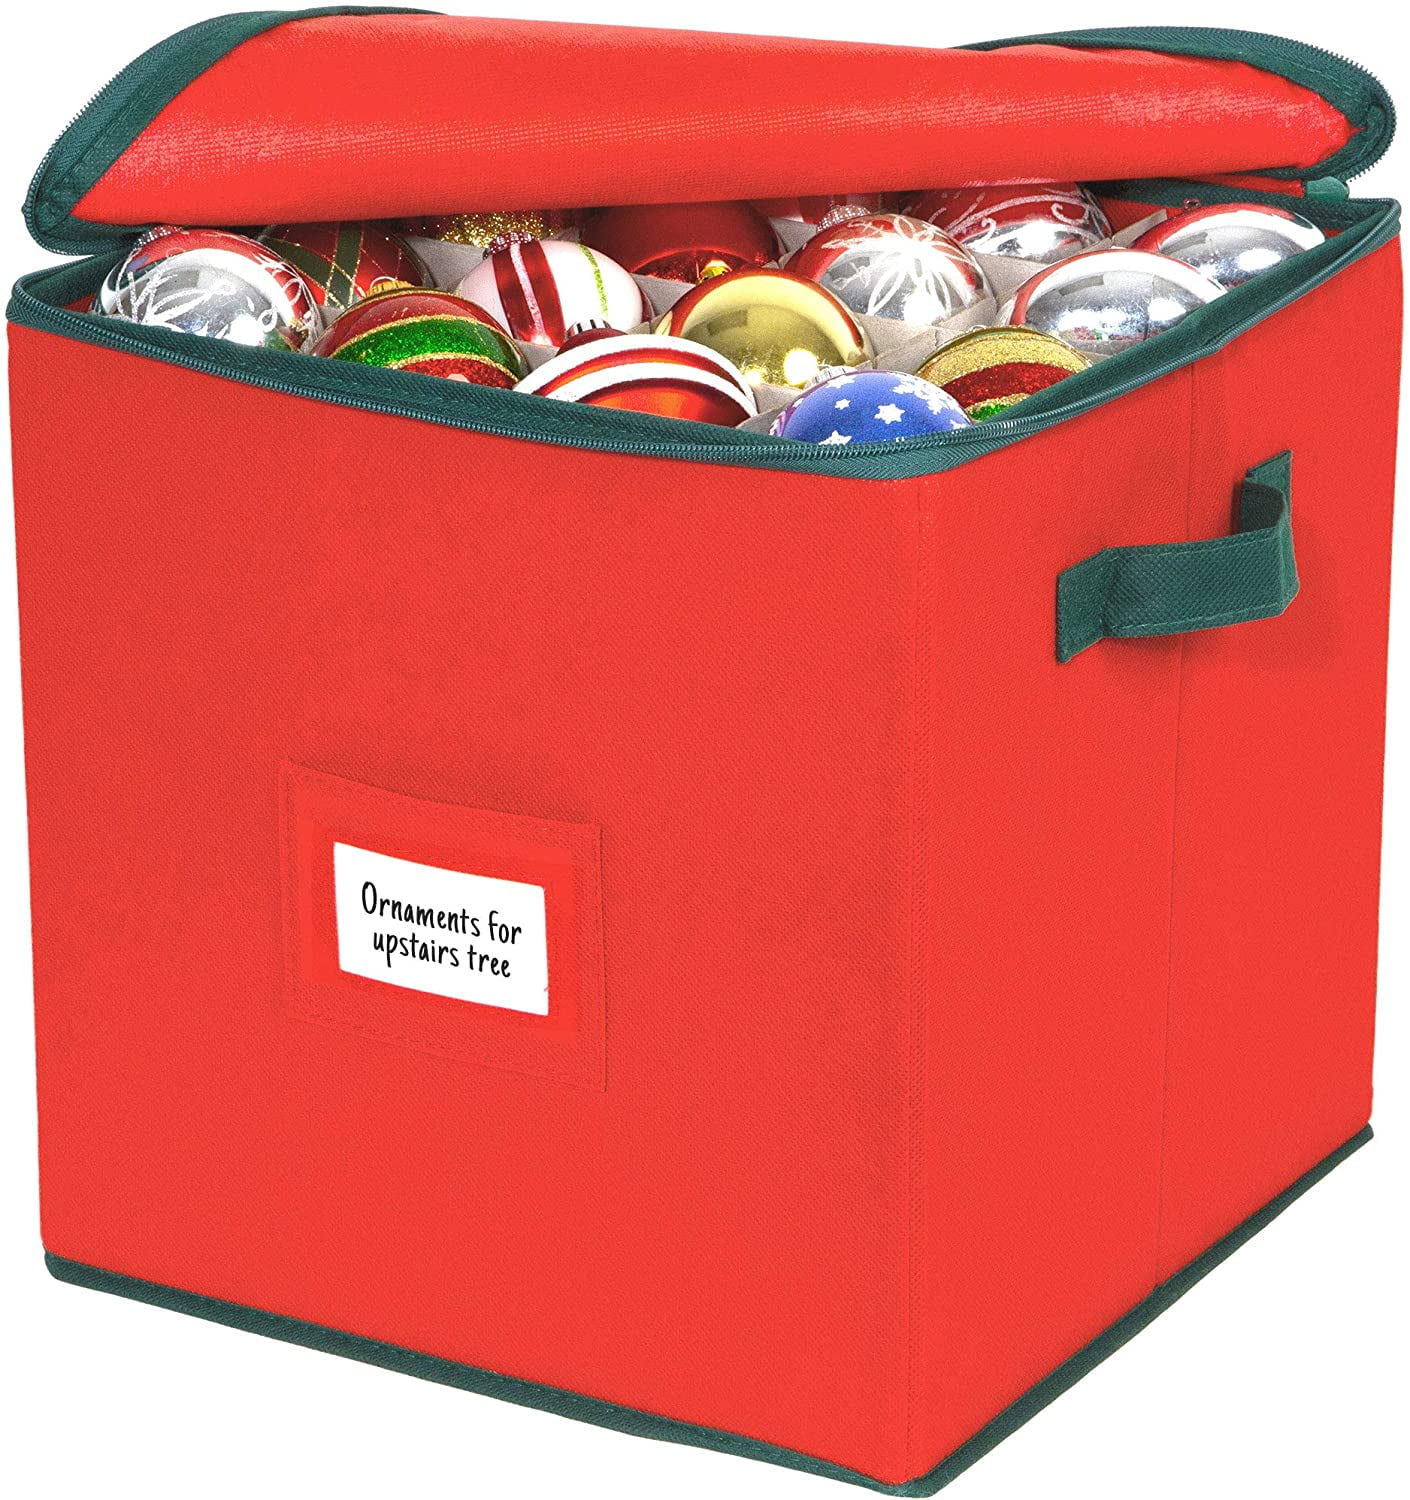 DOVAMY Christmas Ornament Storage Containers with Adjustable Dividers, Plastic Ornament Storage Bin with Lids, Red Xmas Organizer and Decoration